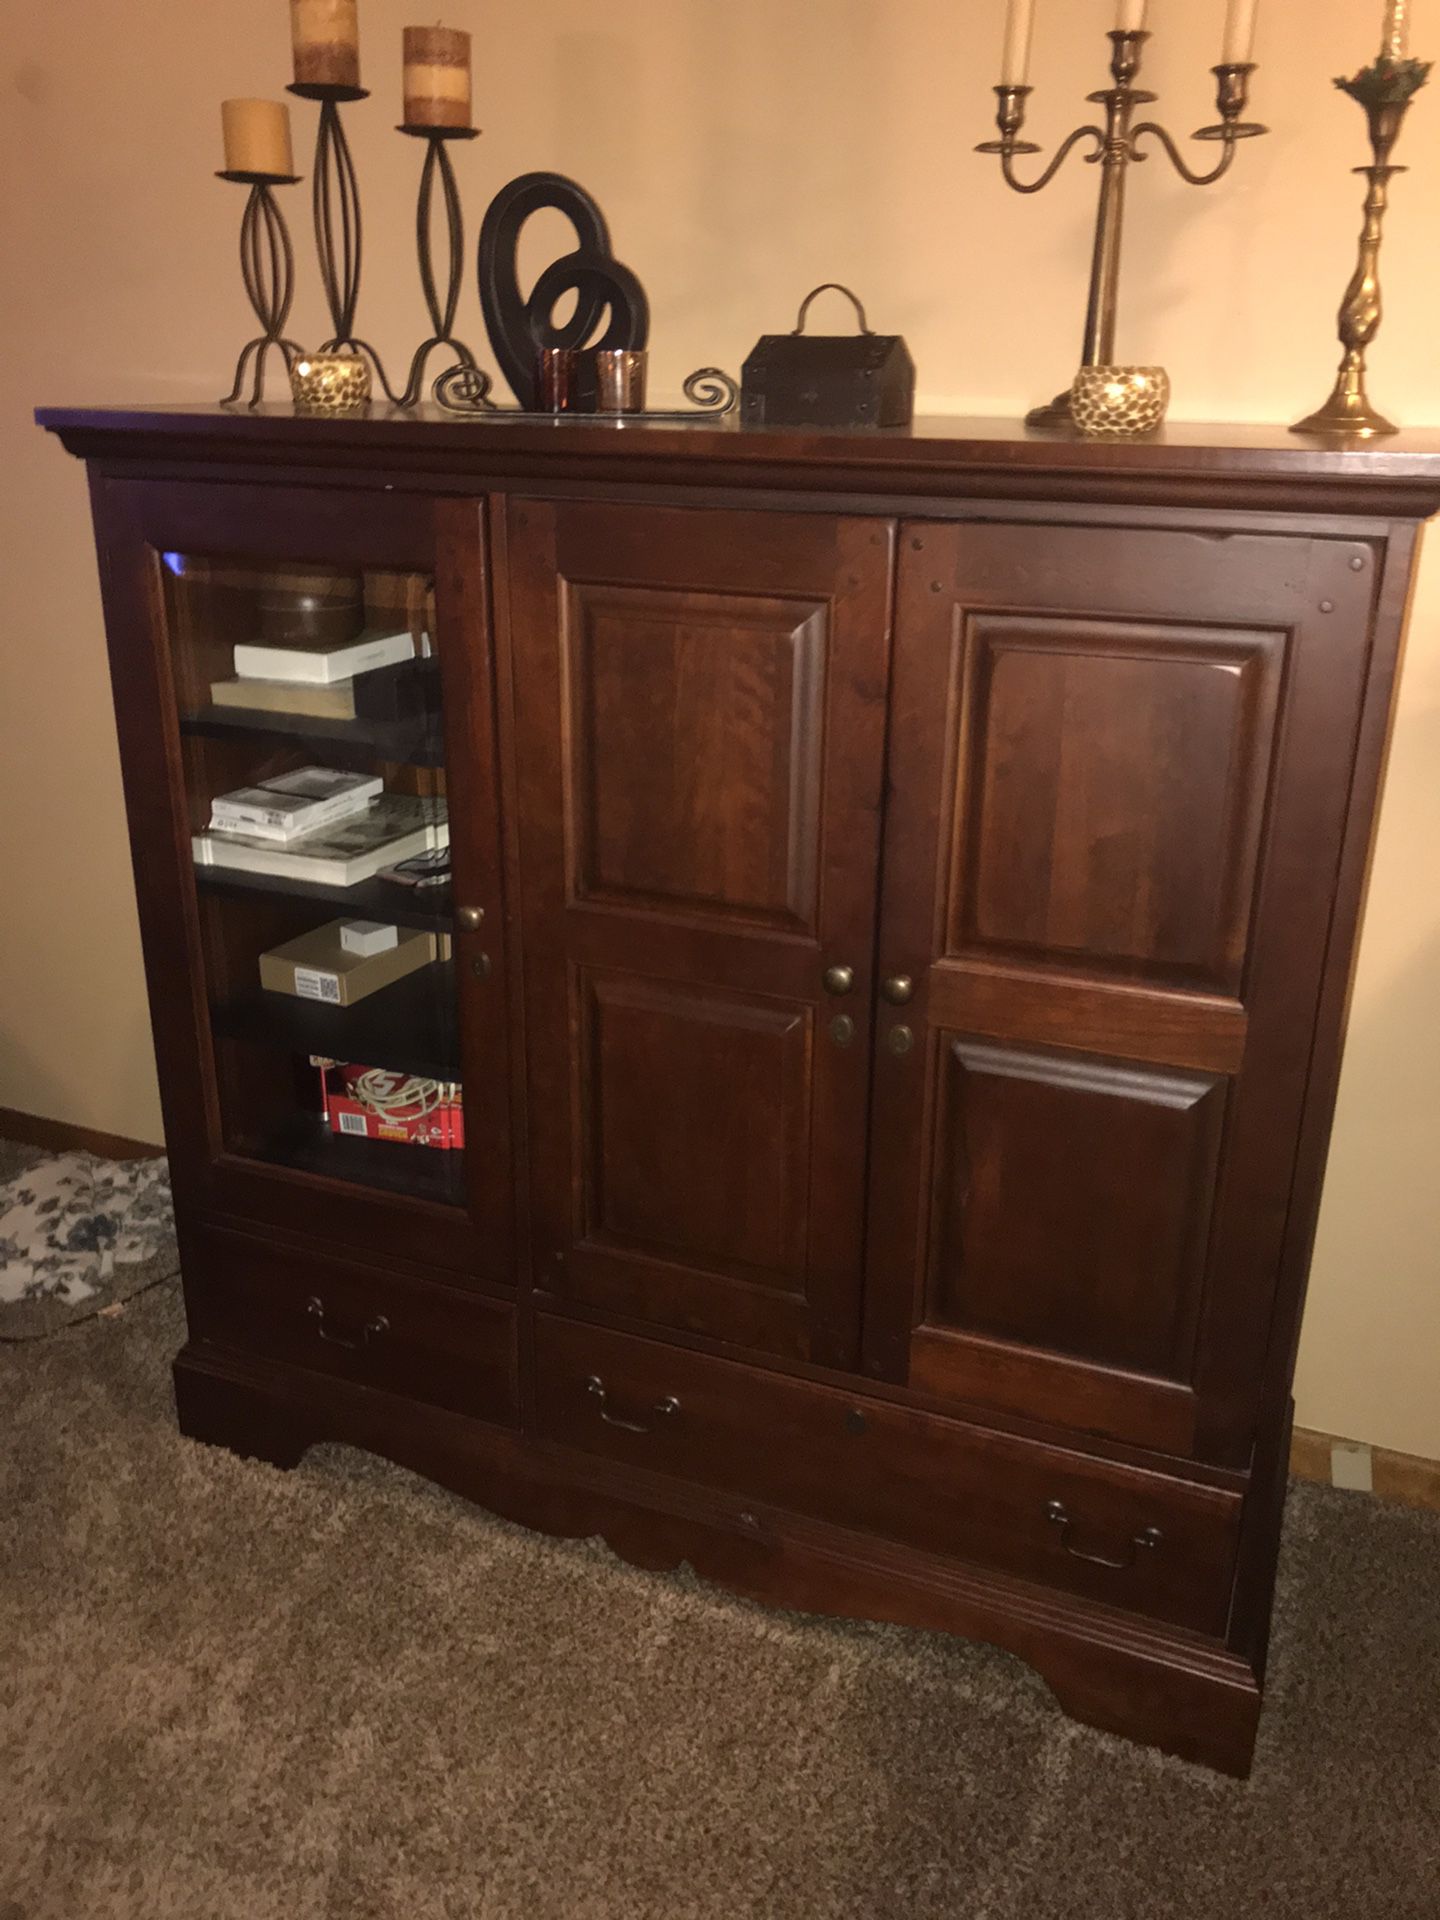 Don’t know those details for this piece of furniture, I’ve had it for 30 years, I paid $2,500 at that time.